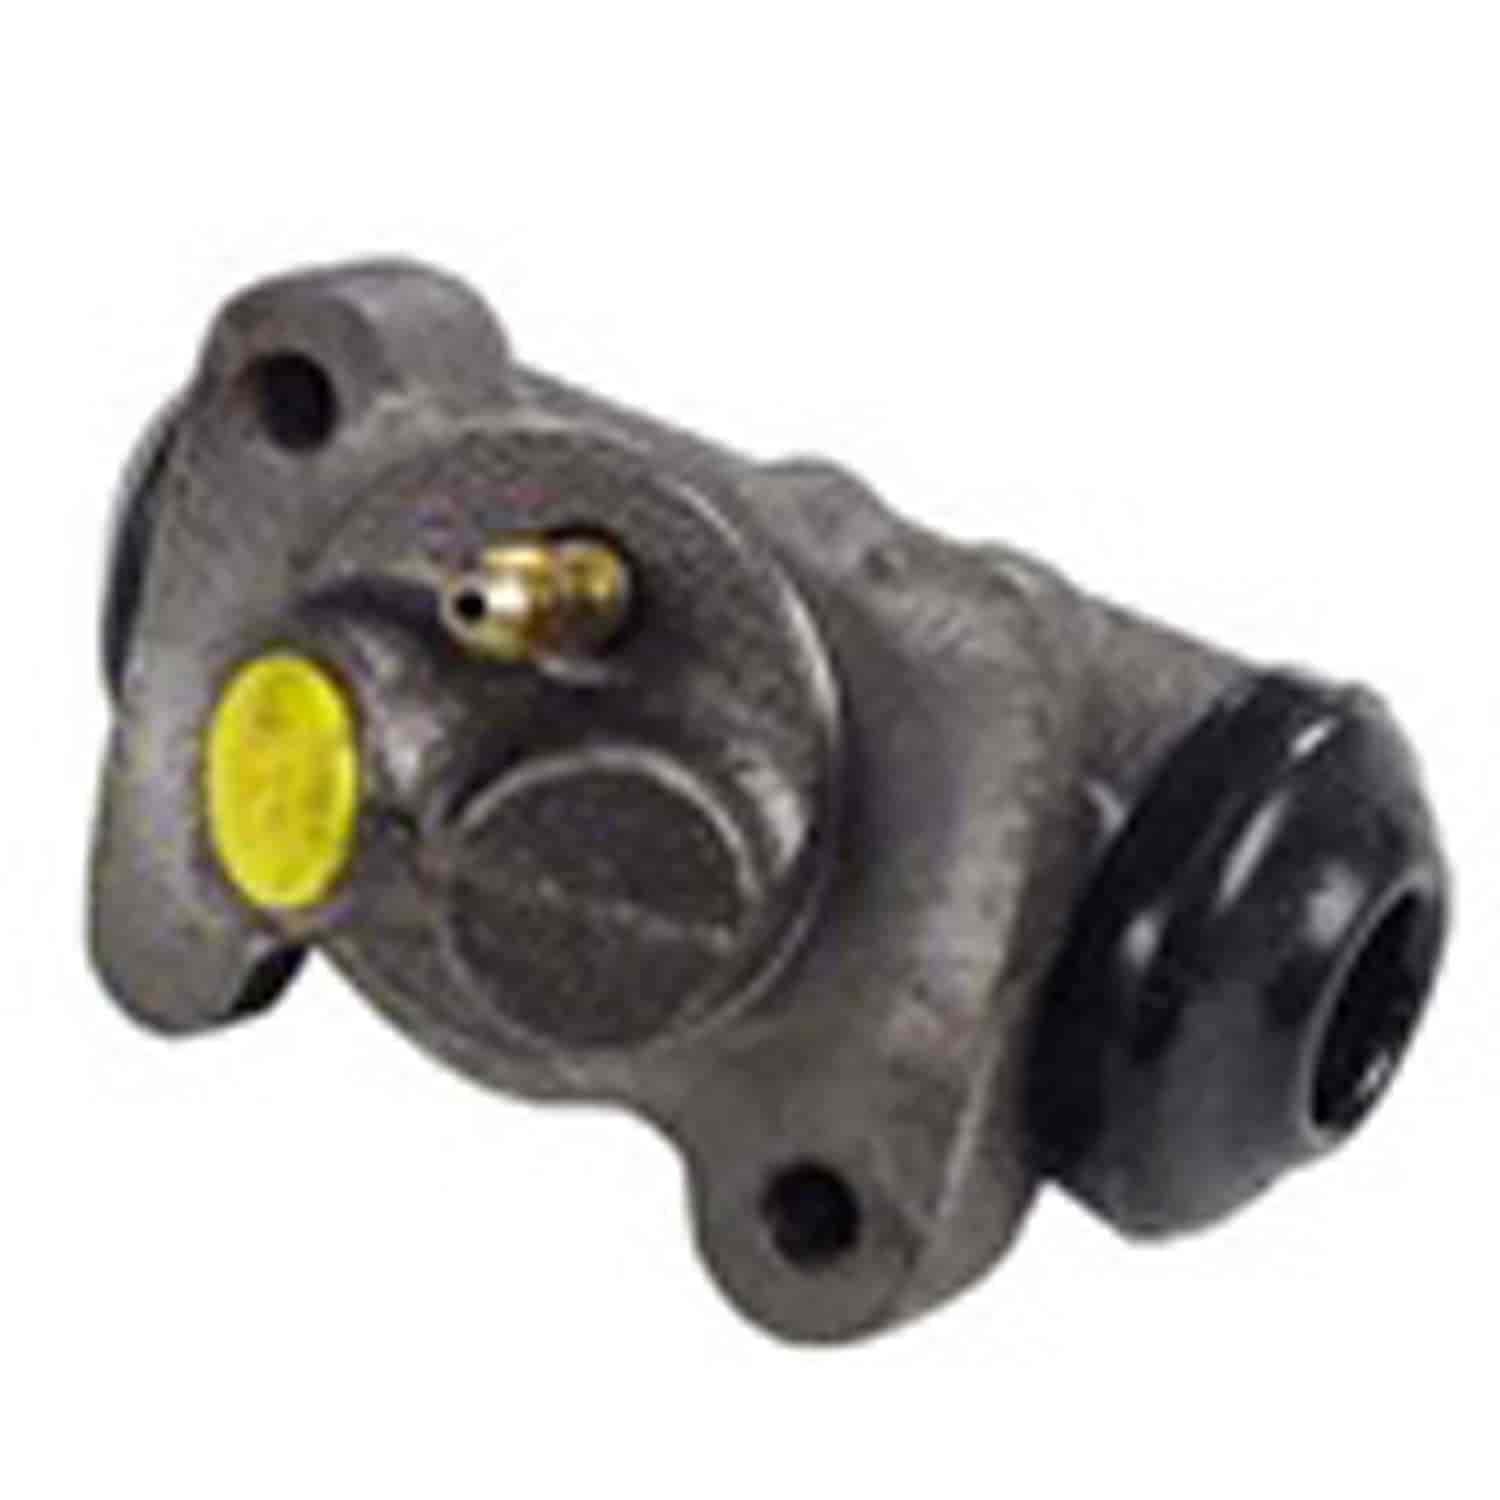 This left rear brake wheel cylinder from Omix-ADA fits 46-64 Willys pickups and station wagons.